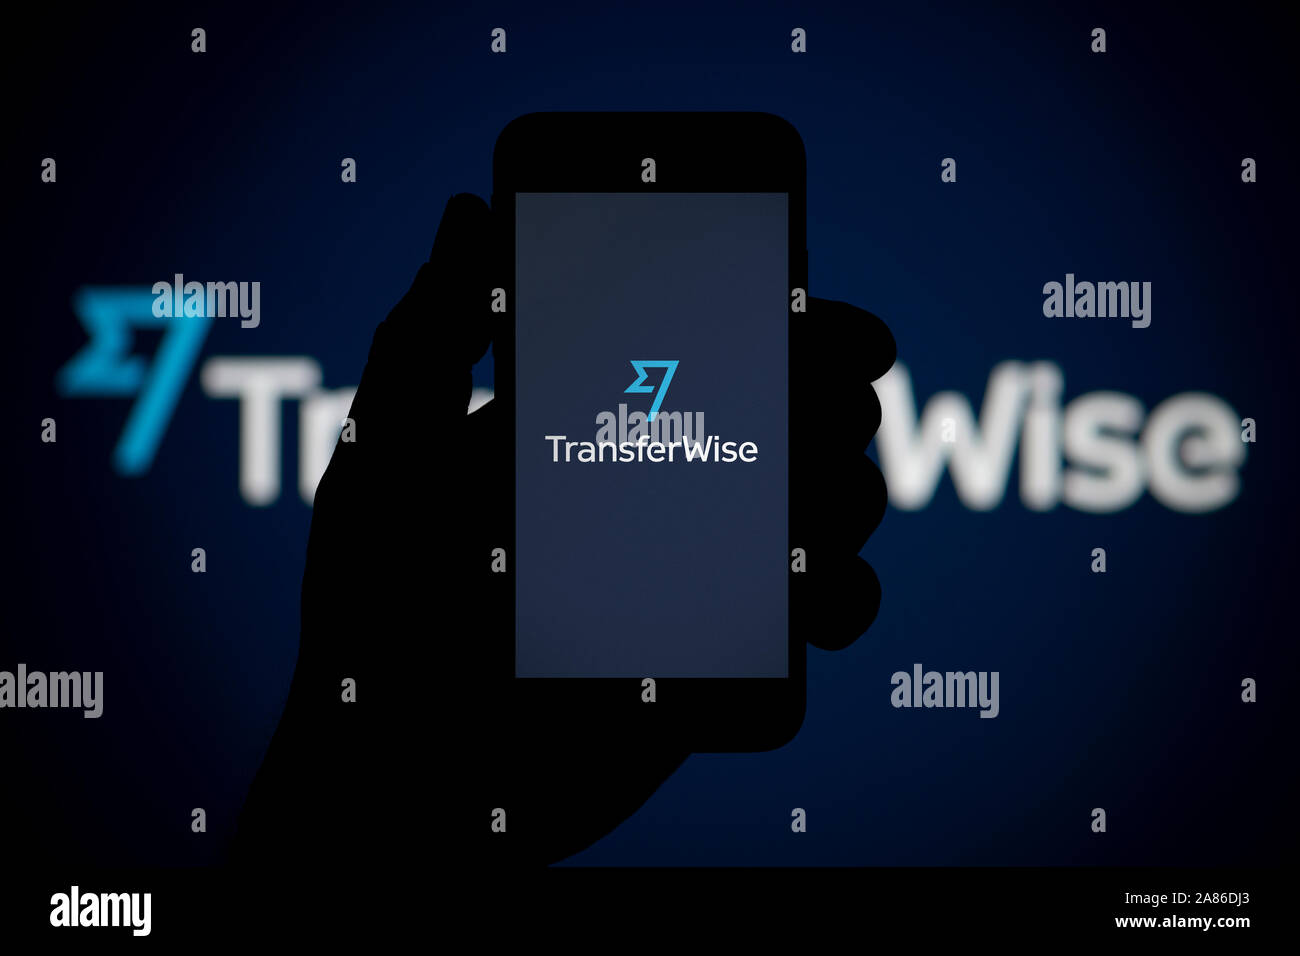 A man looks at his iPhone which displays the TransferWise logo, with the same logo in the background (Editorial use only). Stock Photo